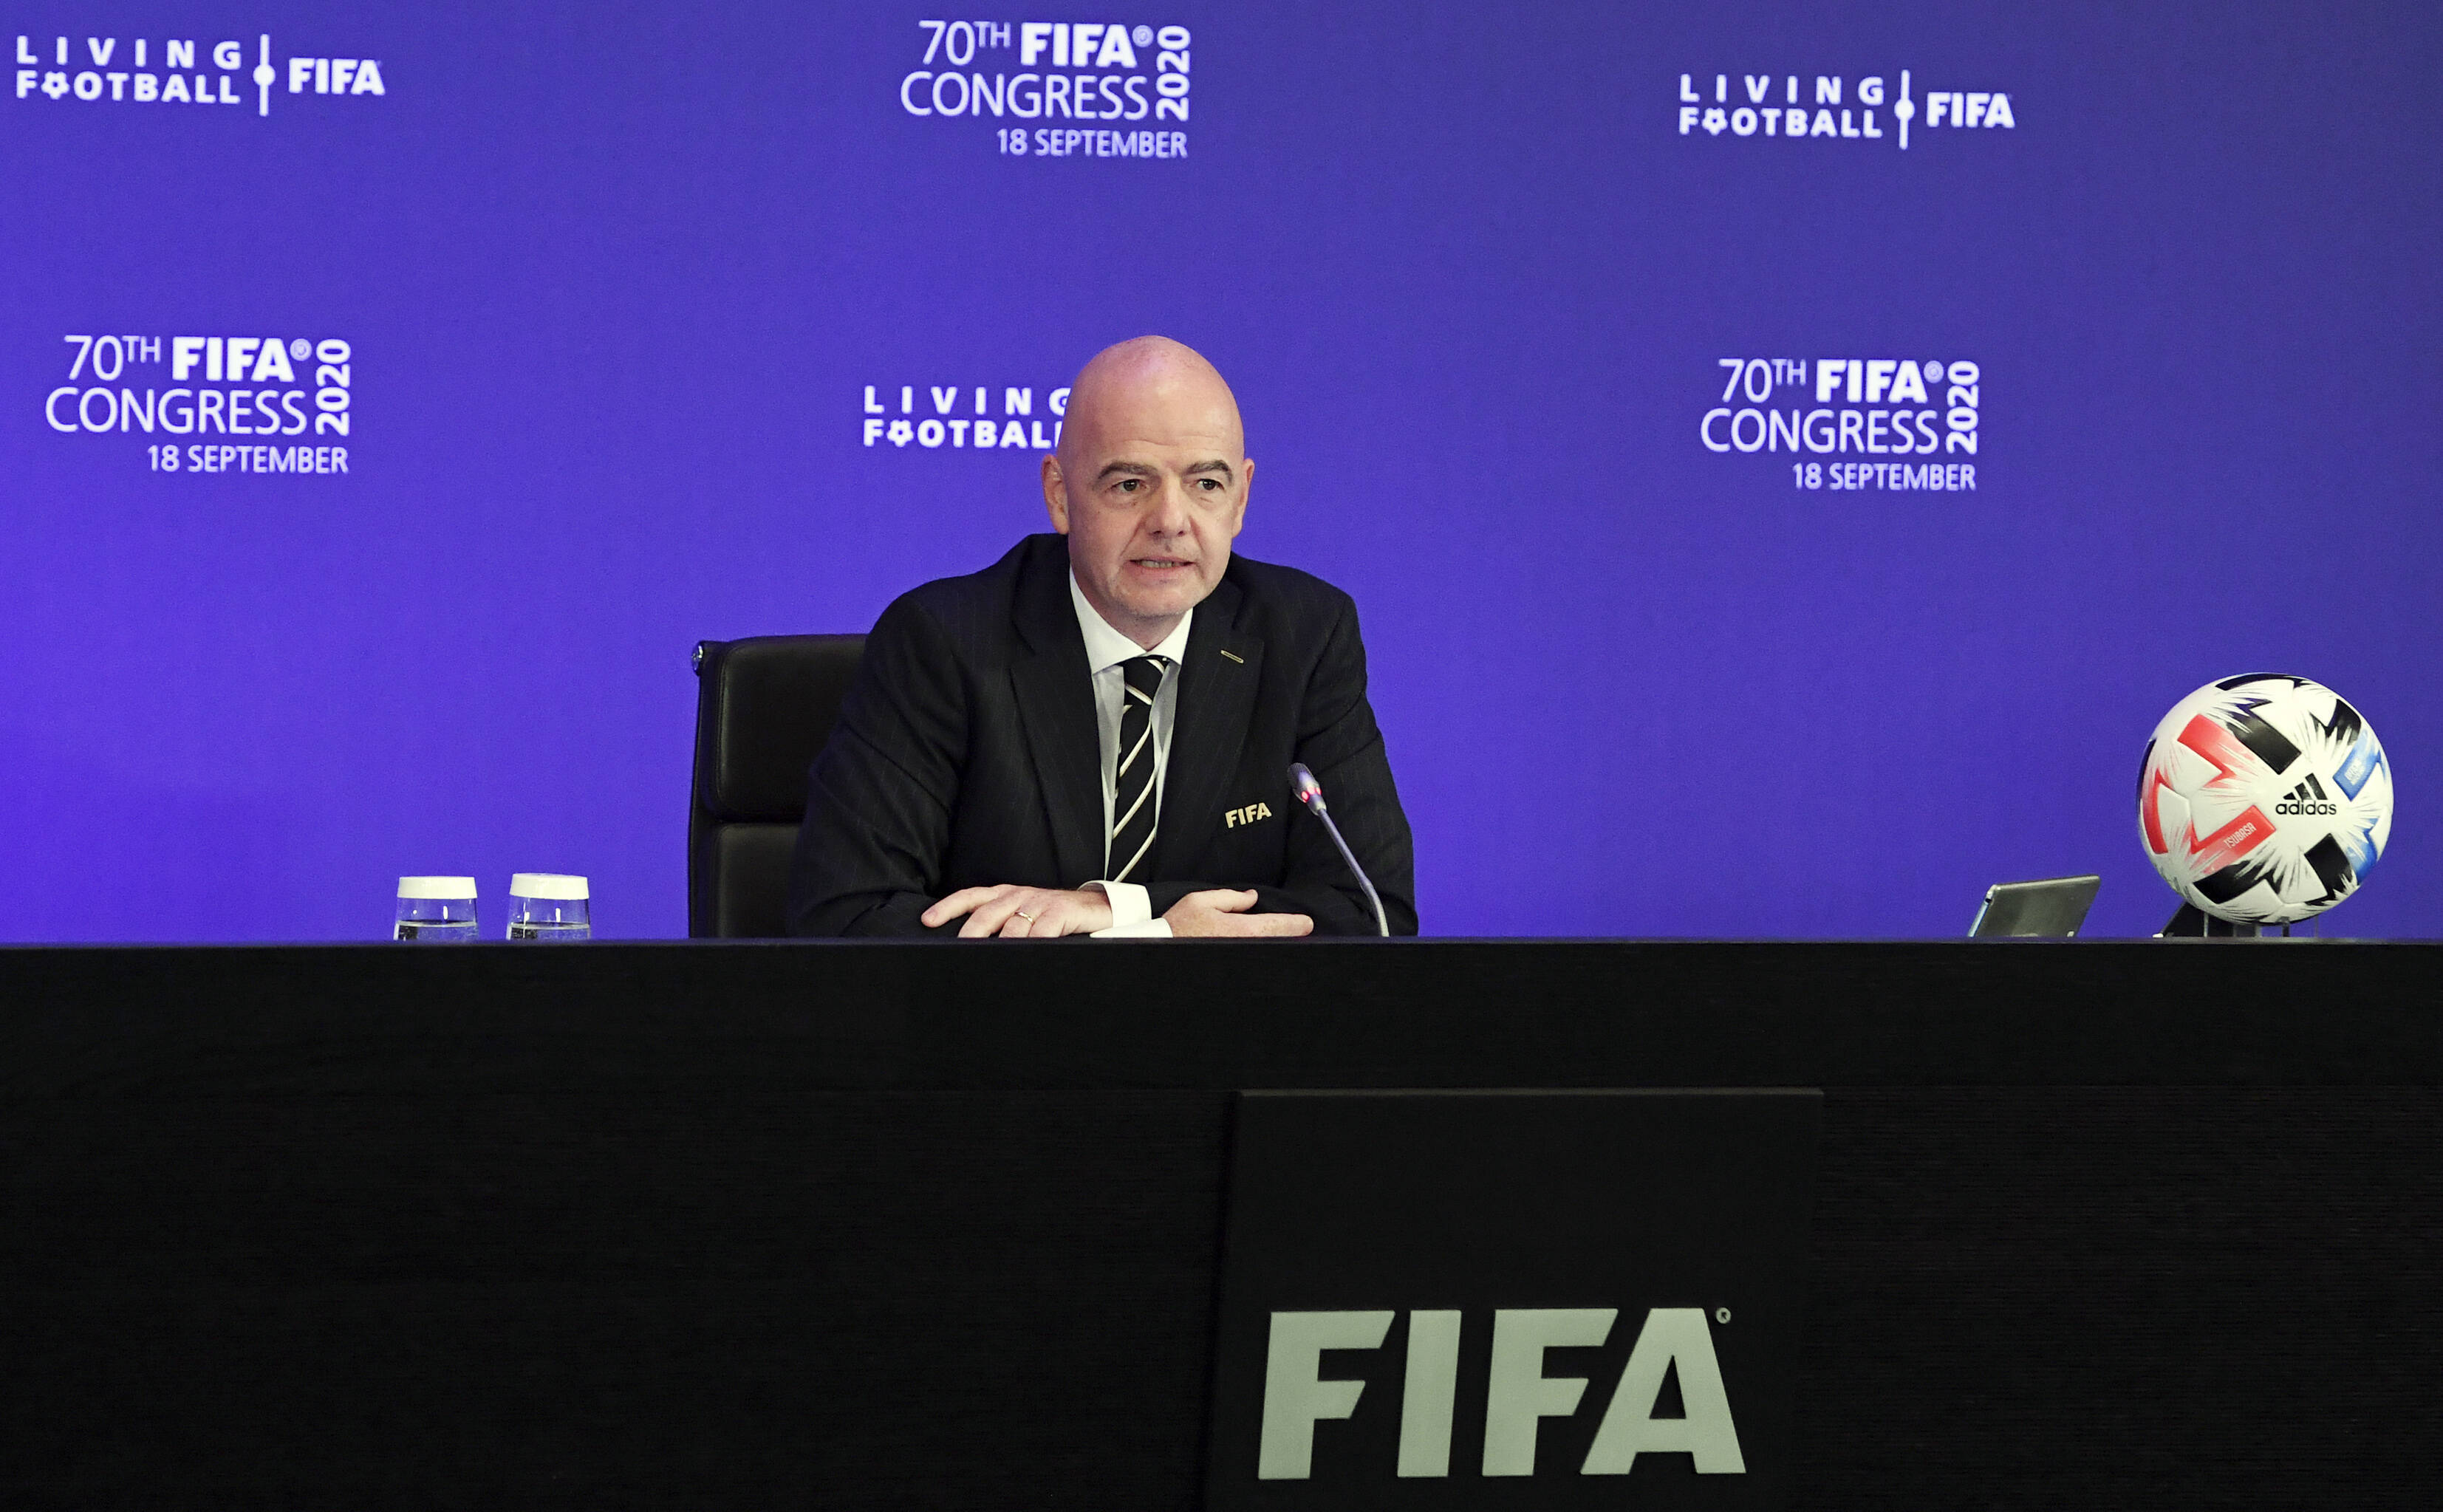 For the Italians it is sad and it makes me want to cry, admits Gianni Infantino